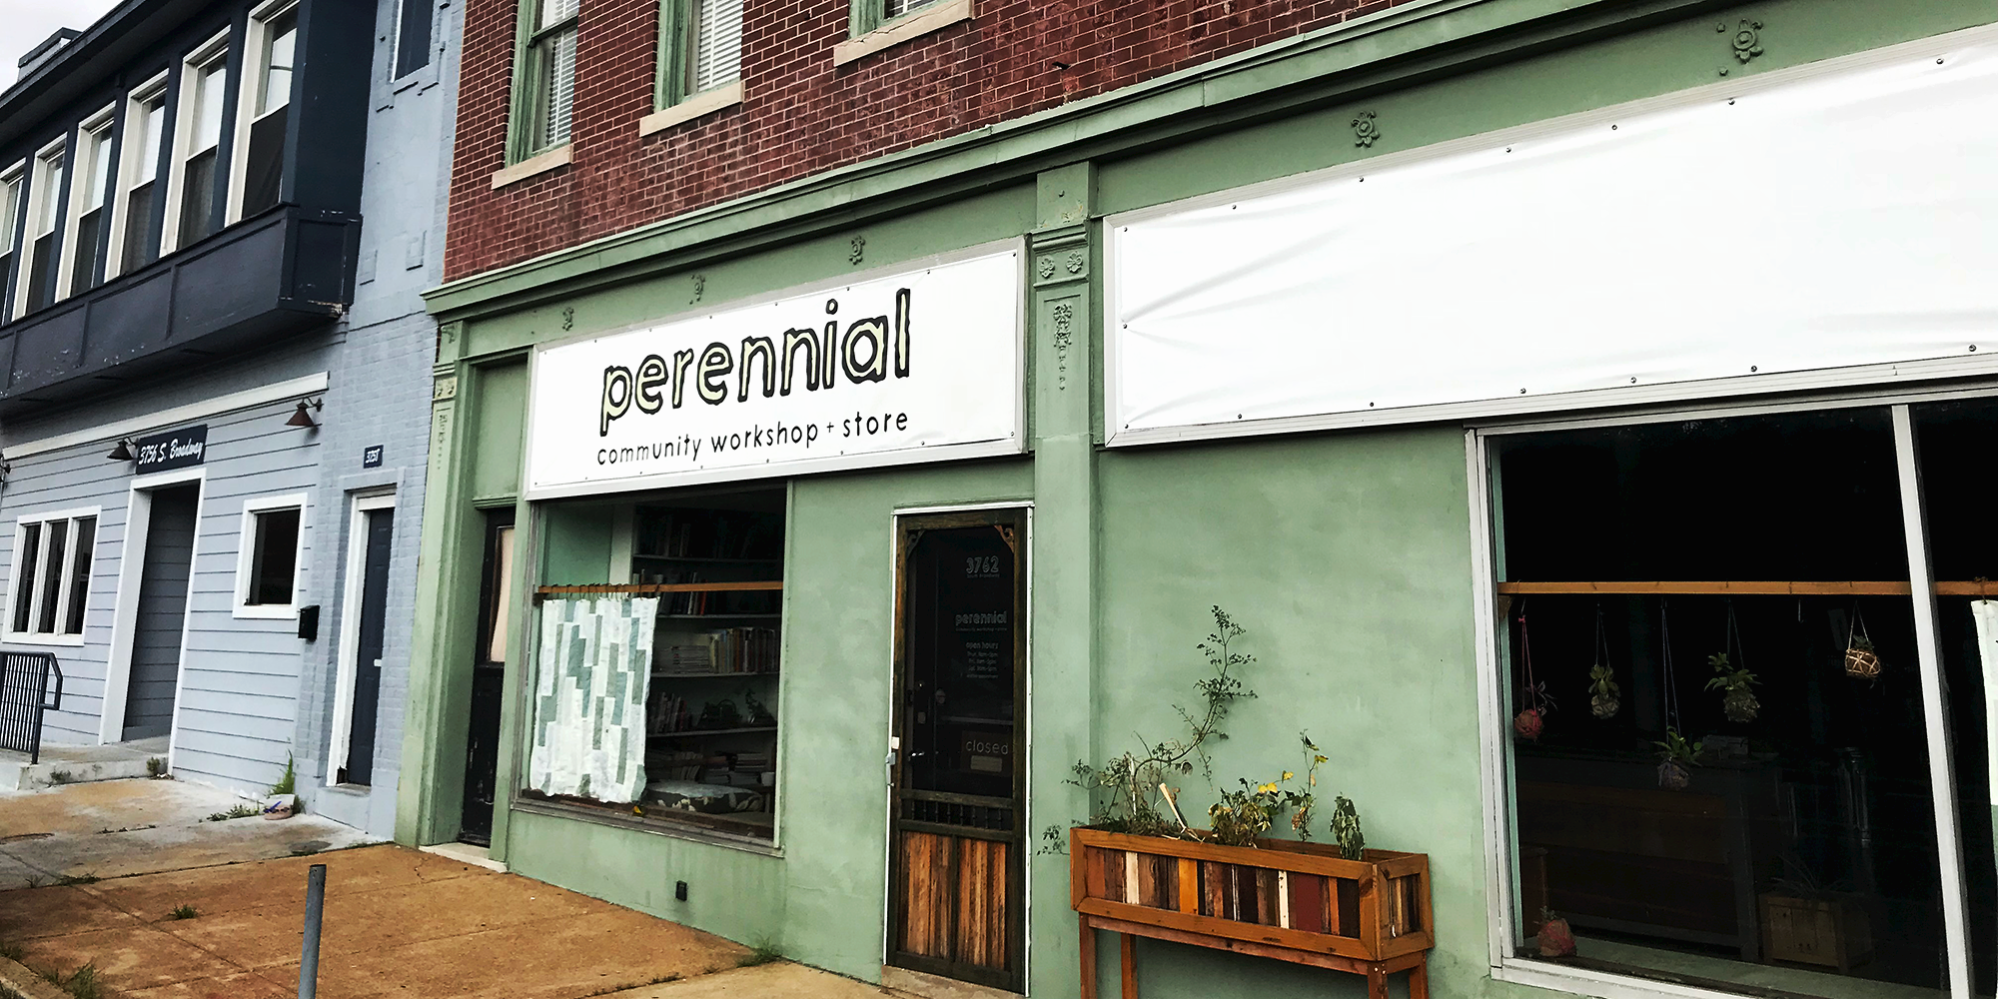 Perennial's studio and headquarters on South Broadway in Marine Villa, St. Louis, MO.